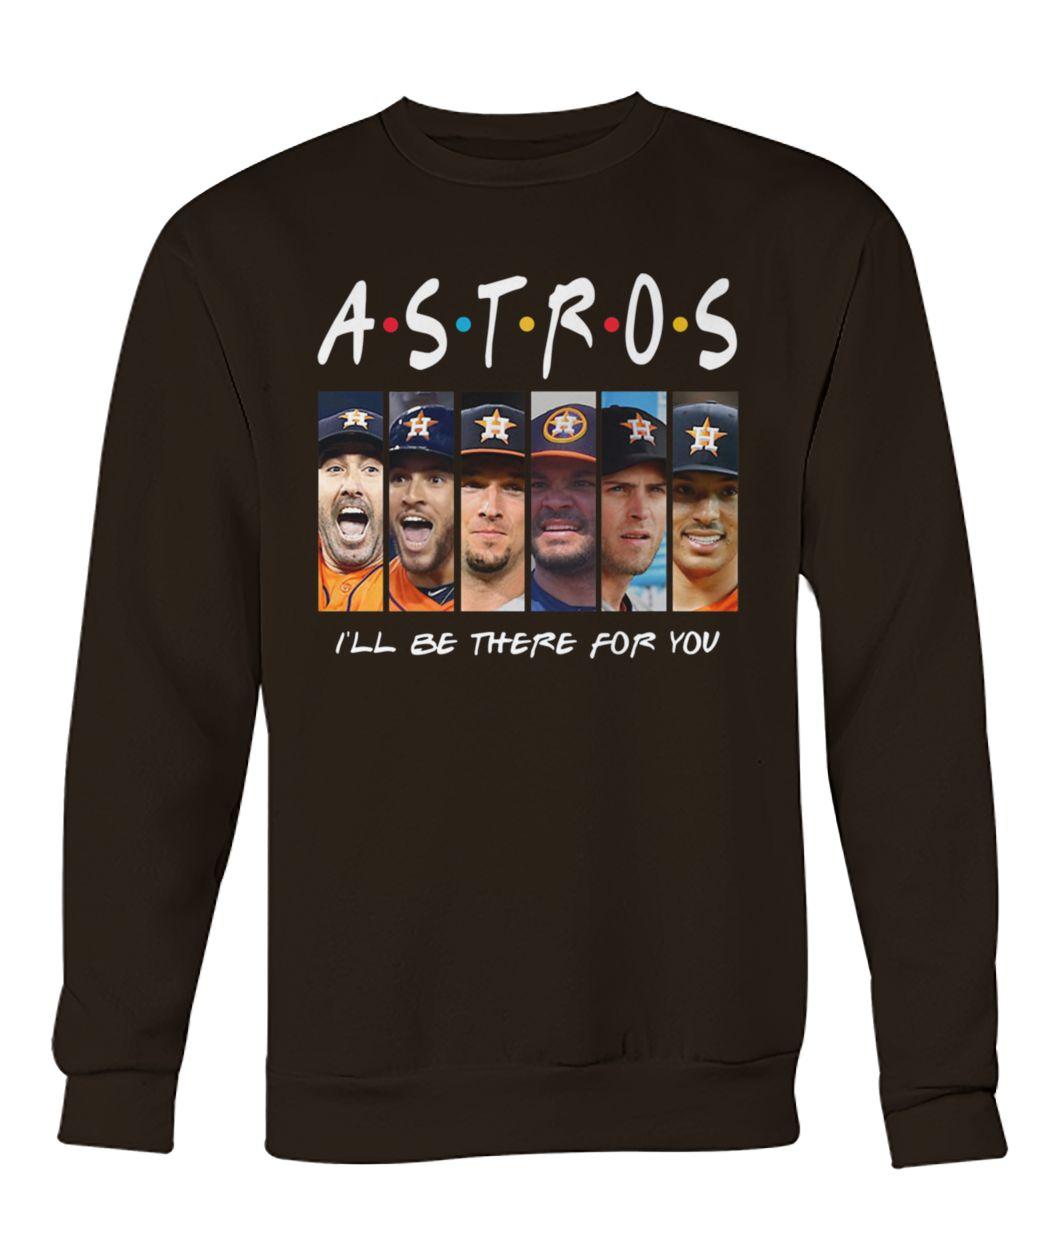 Friends tv show houston astros I’ll be there for you sweatshirt